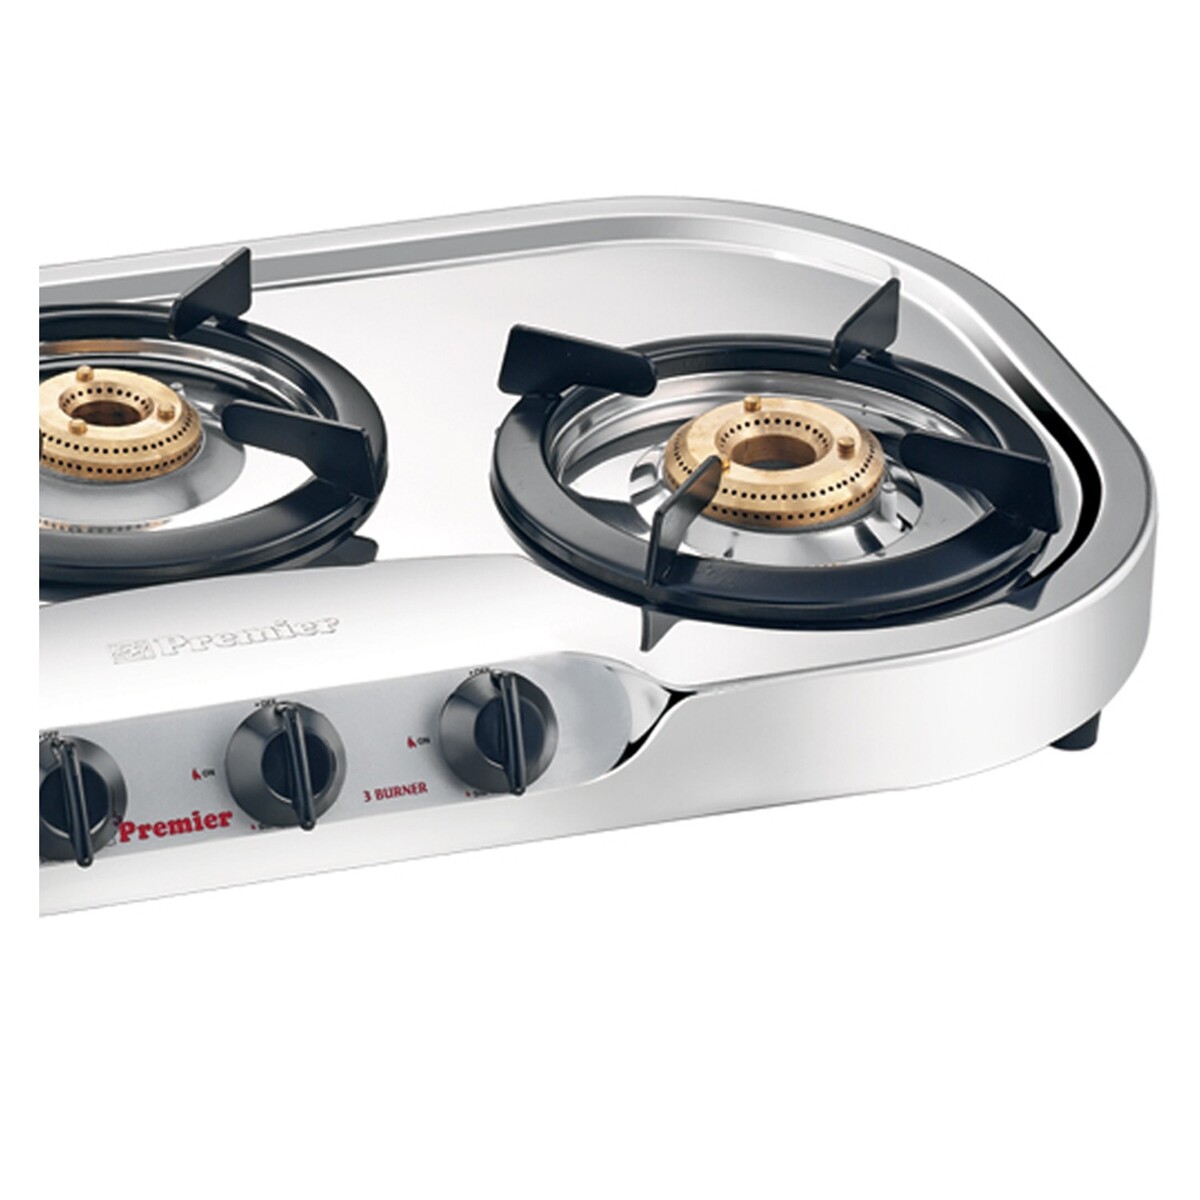 Premier Oval Stainless Steel Gas Stove 3 Burner